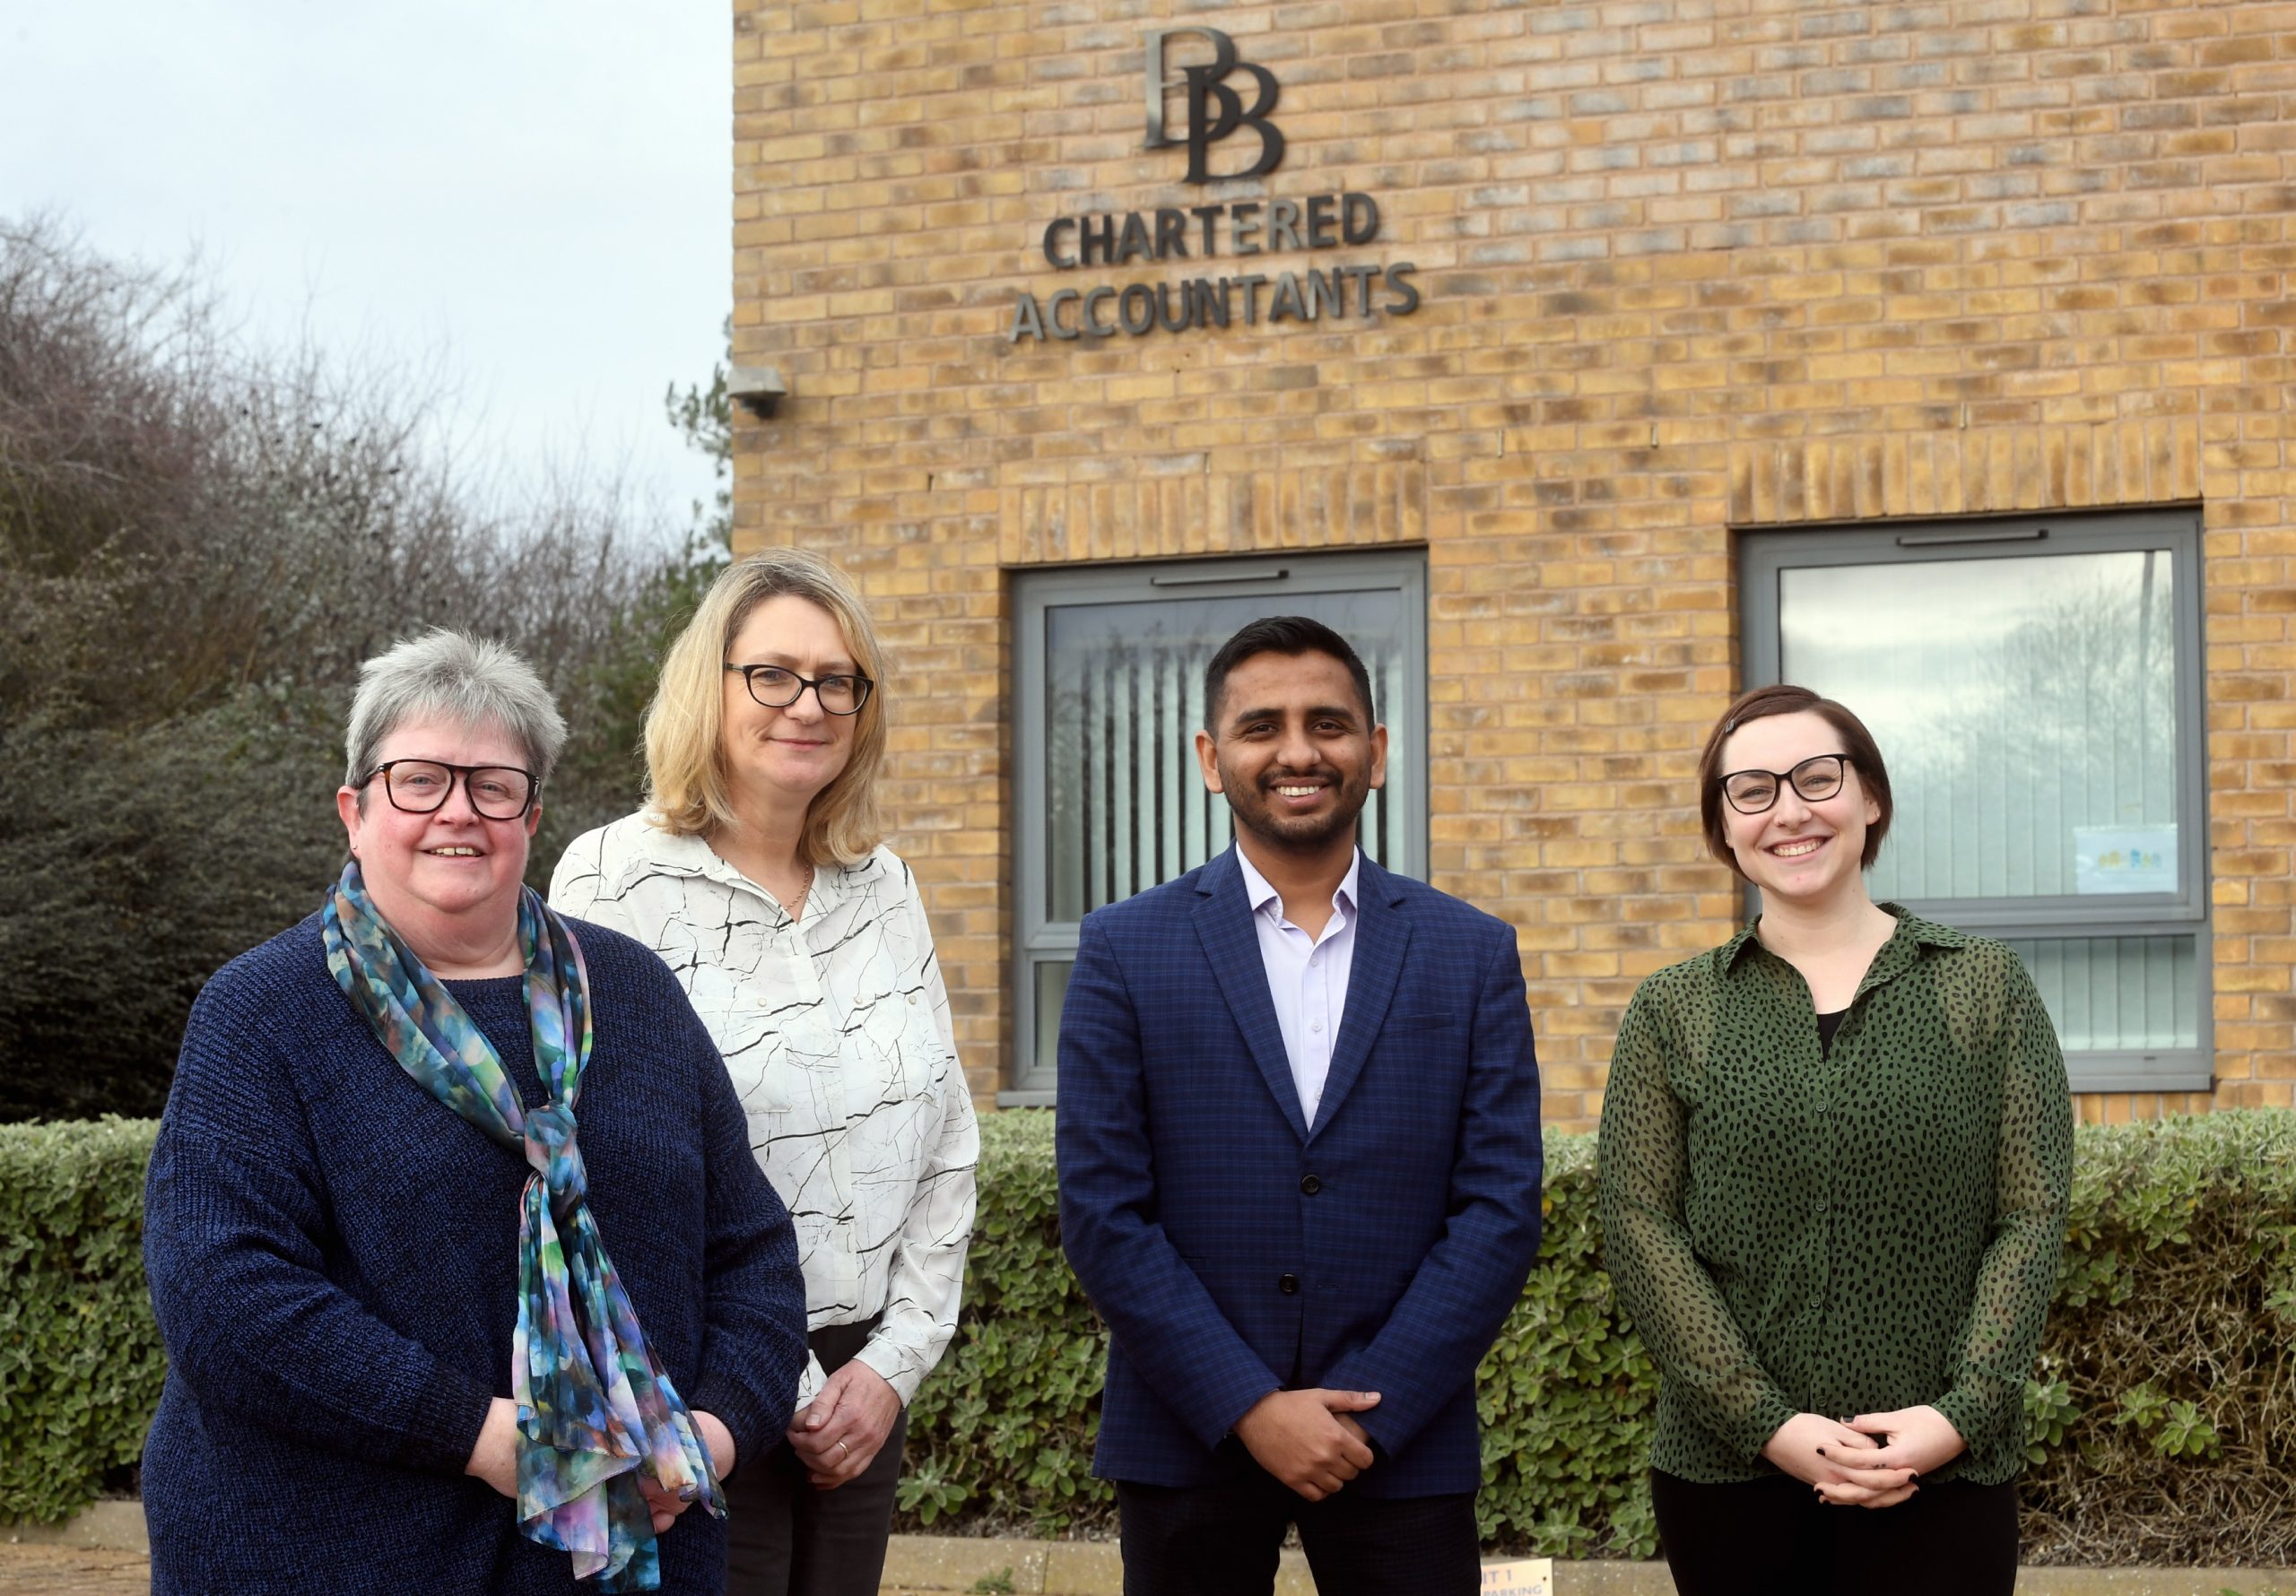 From left to right - Julie Pryke (team leader) with Mandy Smith, Sheraz Ahmed, and Amber Hartopp.